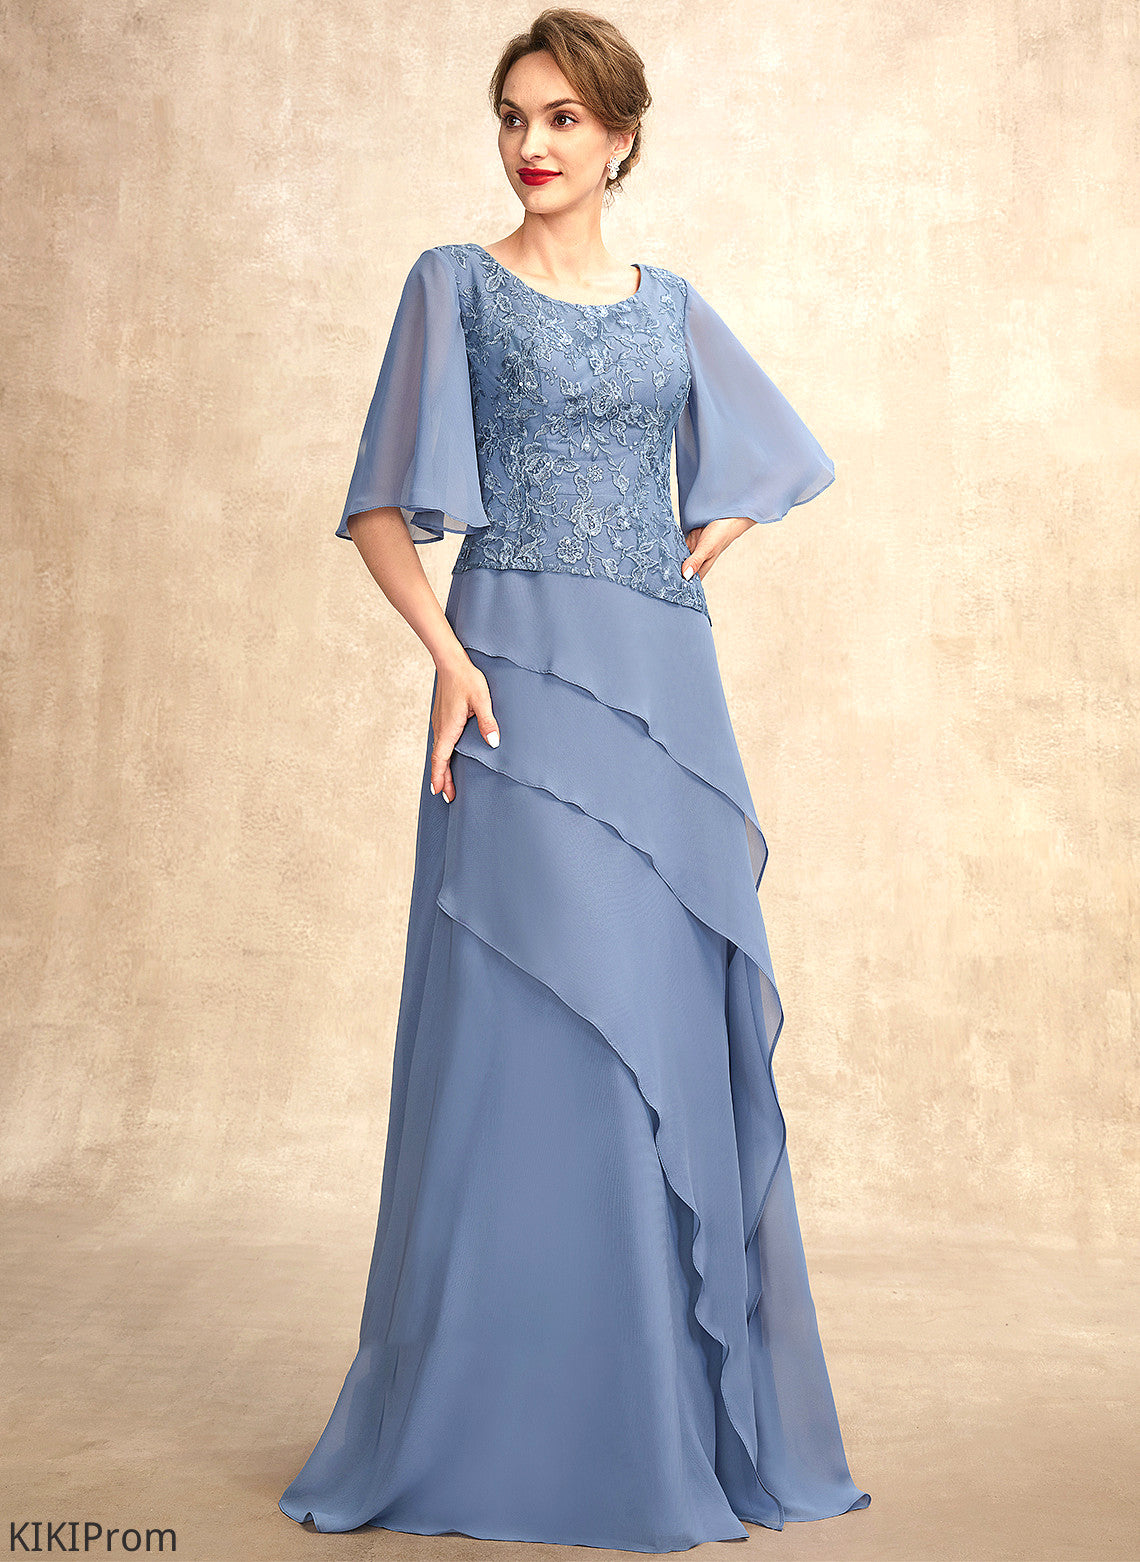 Scoop Neck Dress With Mother of the Bride Dresses Ruffles Mother Lace Floor-Length the of Sequins Chiffon Bride Cascading Alani A-Line